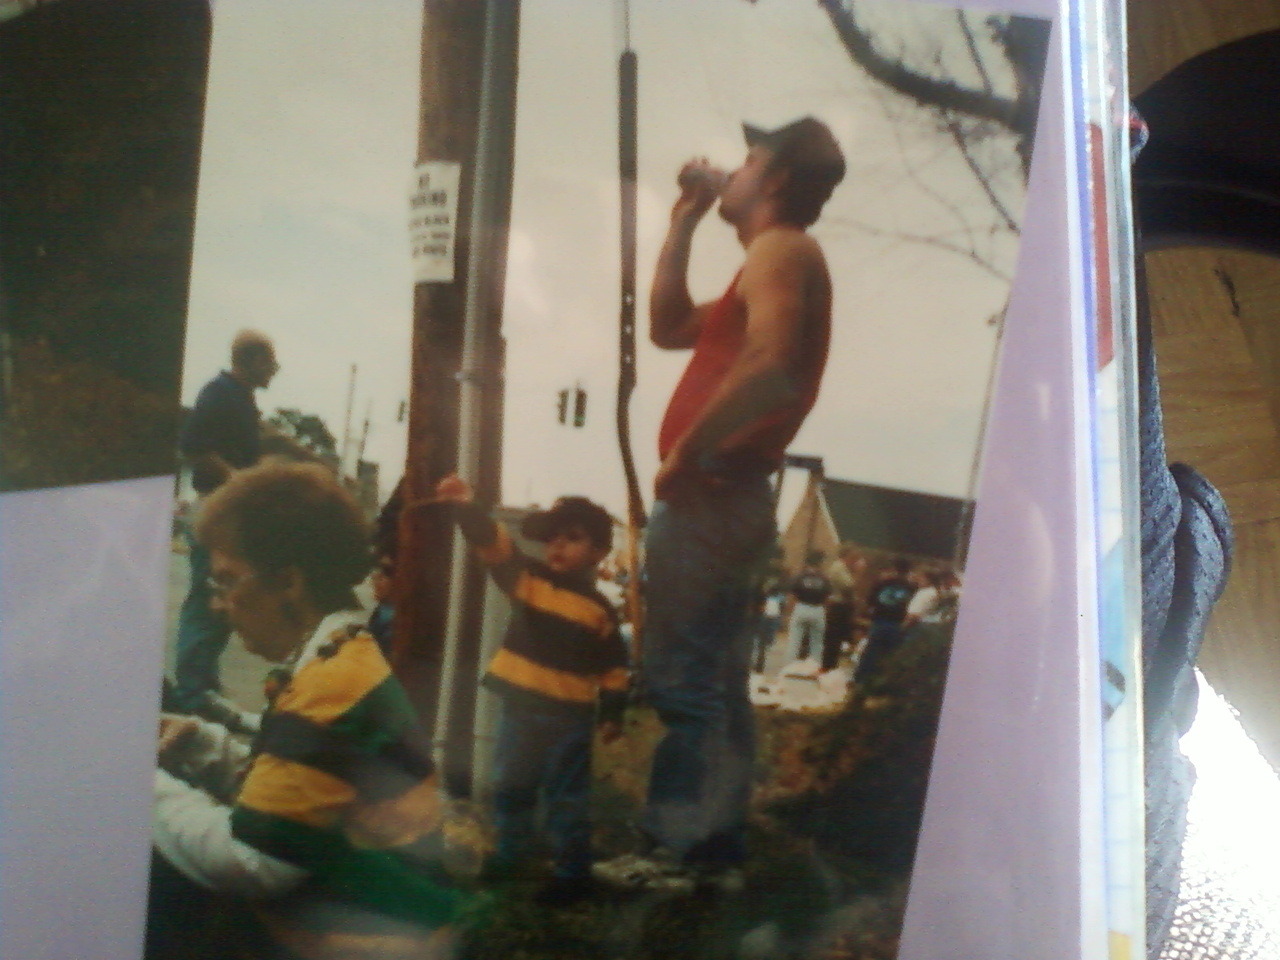 Me and my dad for Mardi Gras, i love how he&rsquo;s chuggin a beer and i&rsquo;m